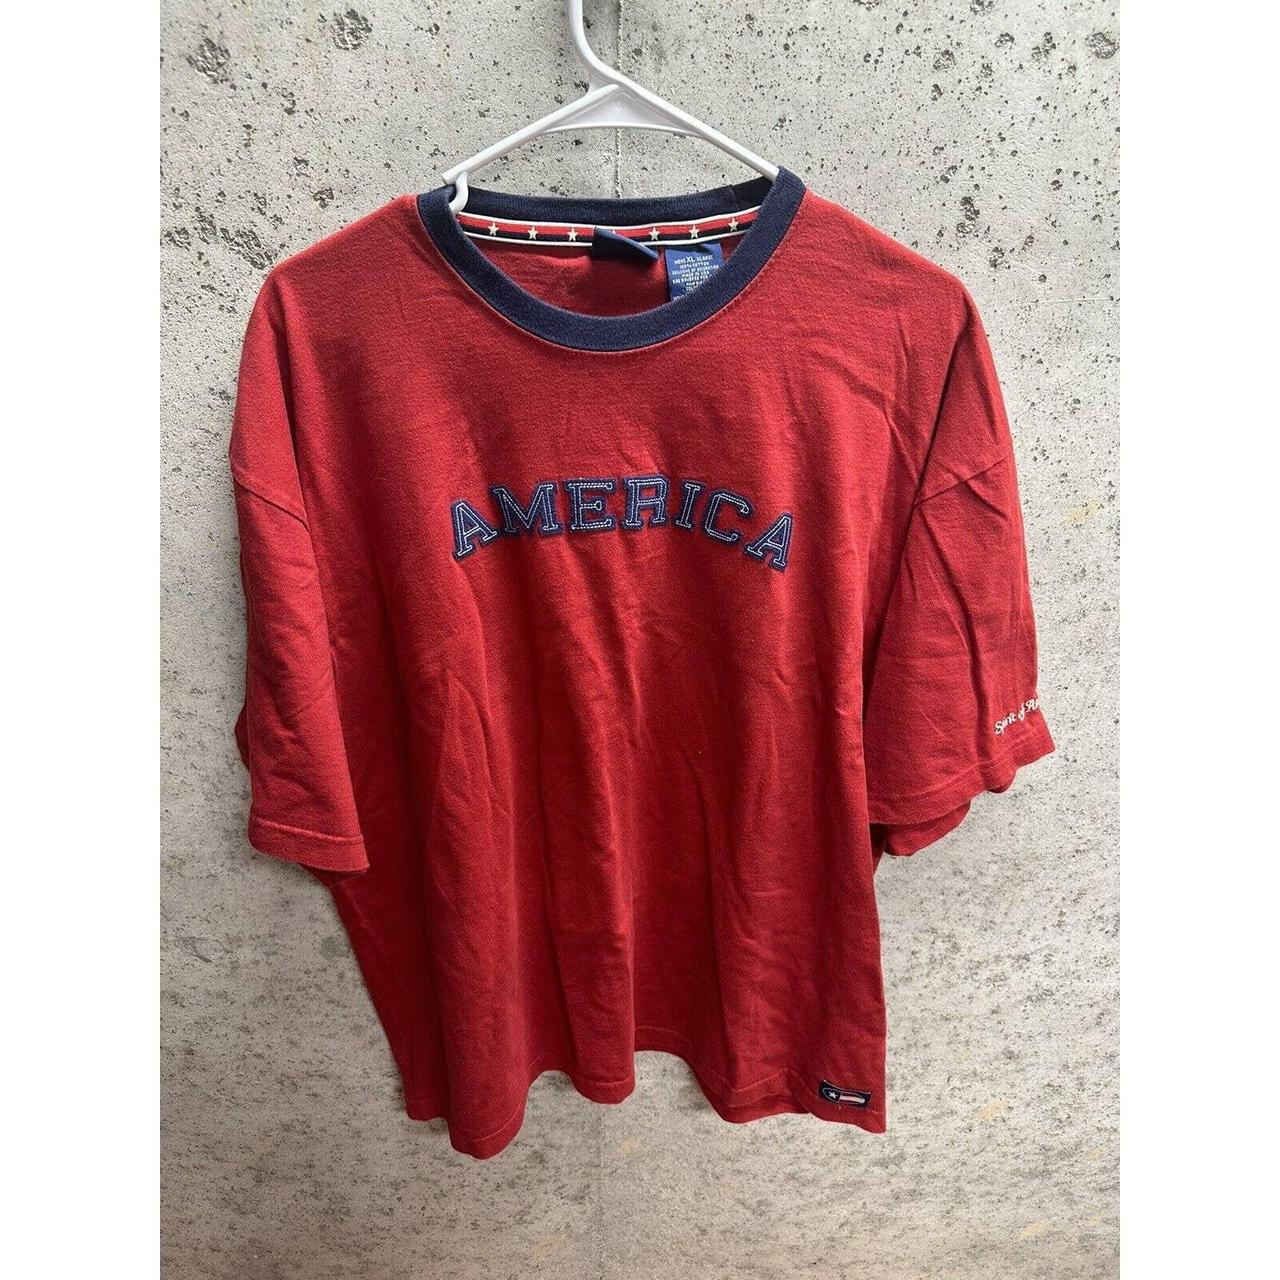 The Unbranded Brand Men's T-Shirt - Red - XL